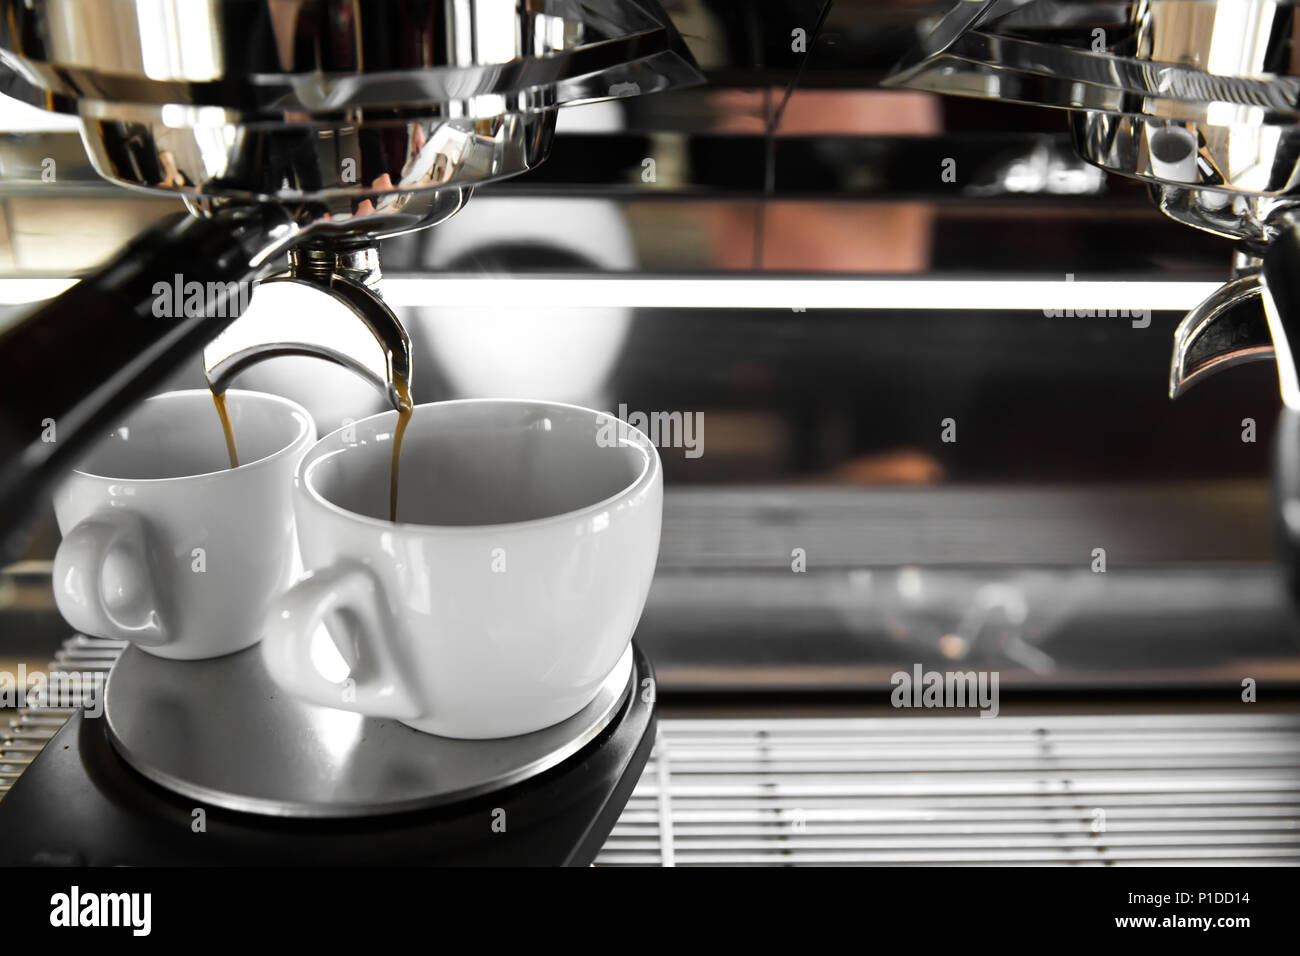 Italian espresso machine on a counter in a restaurant dispensing freshly brewed coffee into two small cups Stock Photo